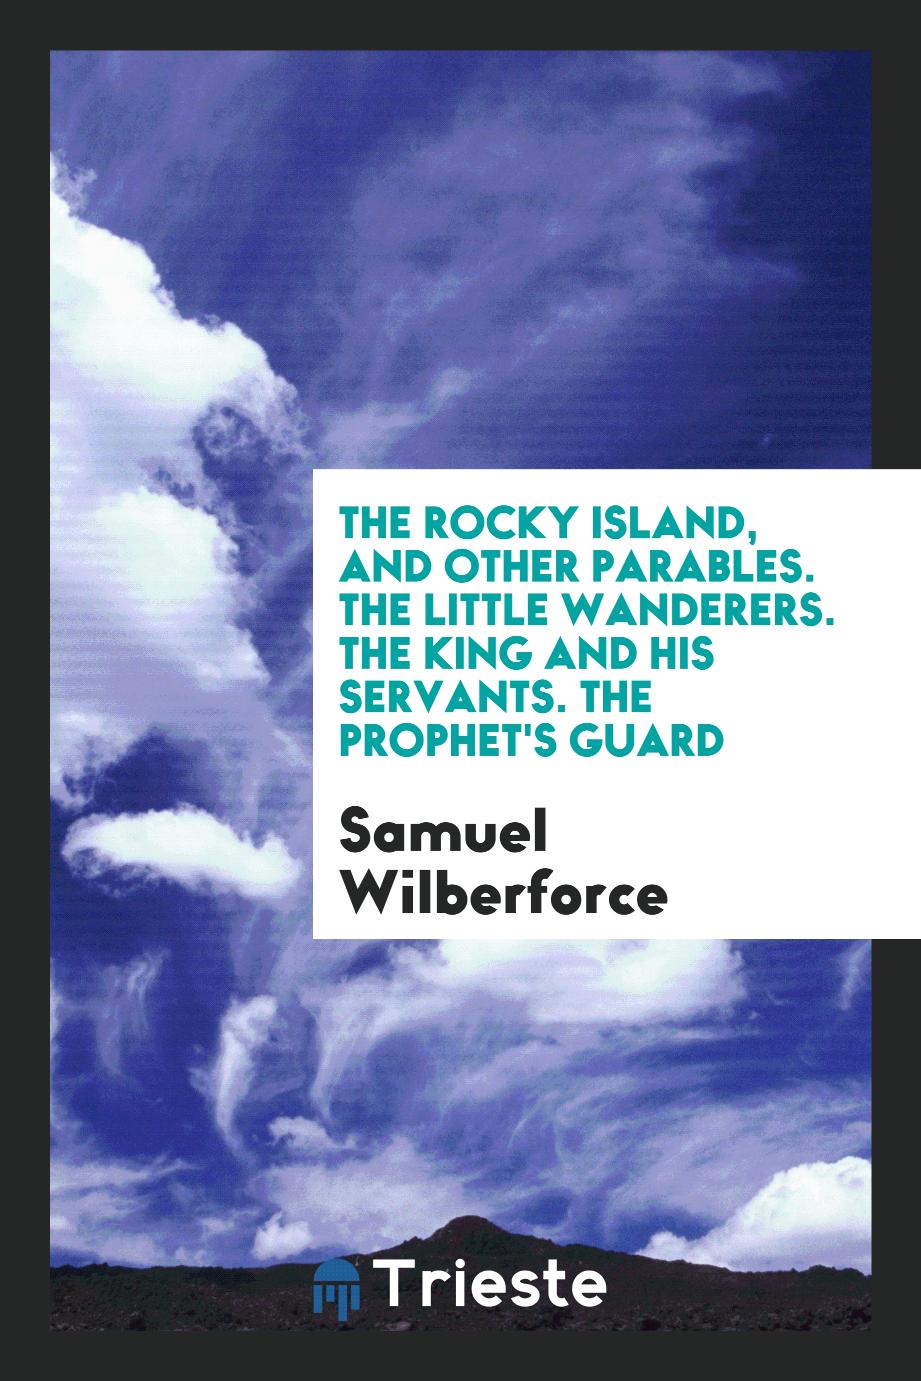 The Rocky Island, and Other Parables. The Little Wanderers. The King and His Servants. The Prophet's Guard